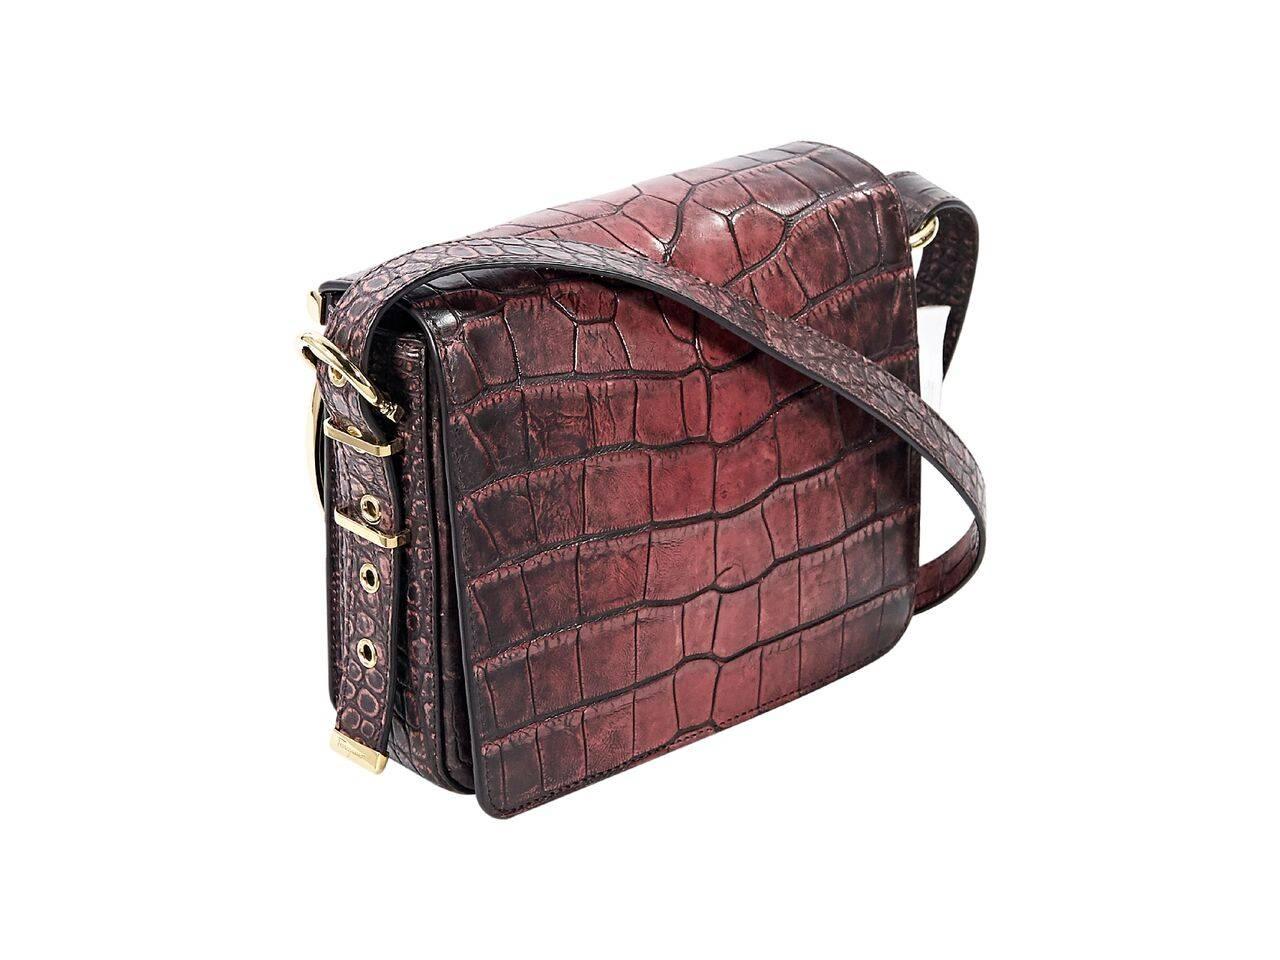 Product details:  Red alligator crossbody bag by Salvatore Ferragamo.  Adjustable crossbody strap.  Front flap with logo hardware detail.  Concealed magnetic closure.  Leather interior with inner zip pocket.  Goldtone hardware.  7.5